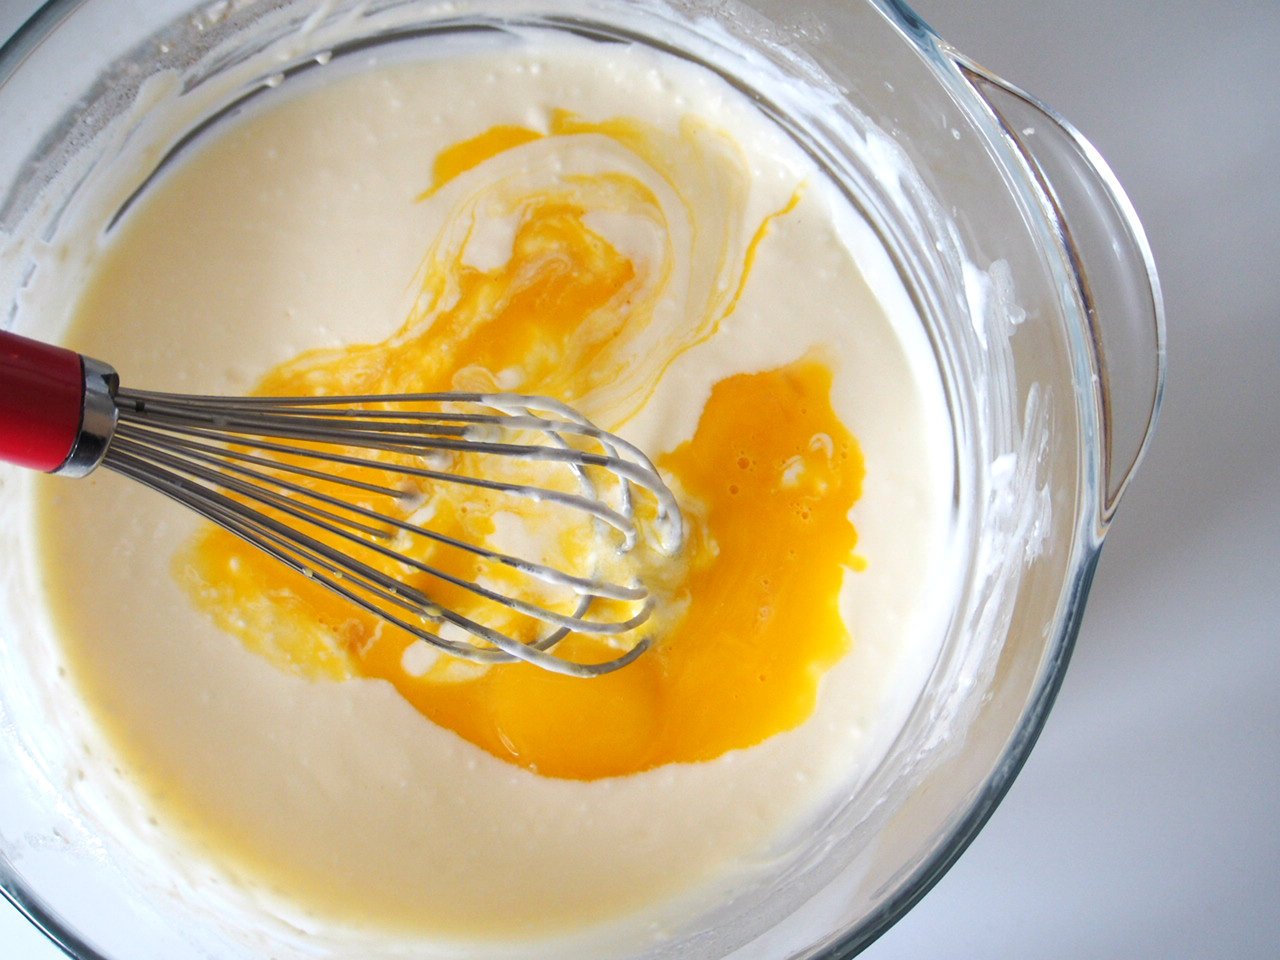 The cream cheese, butter are melted in the double boiler, together with the milk and oil. Egg yolks are added to the melted mixture.